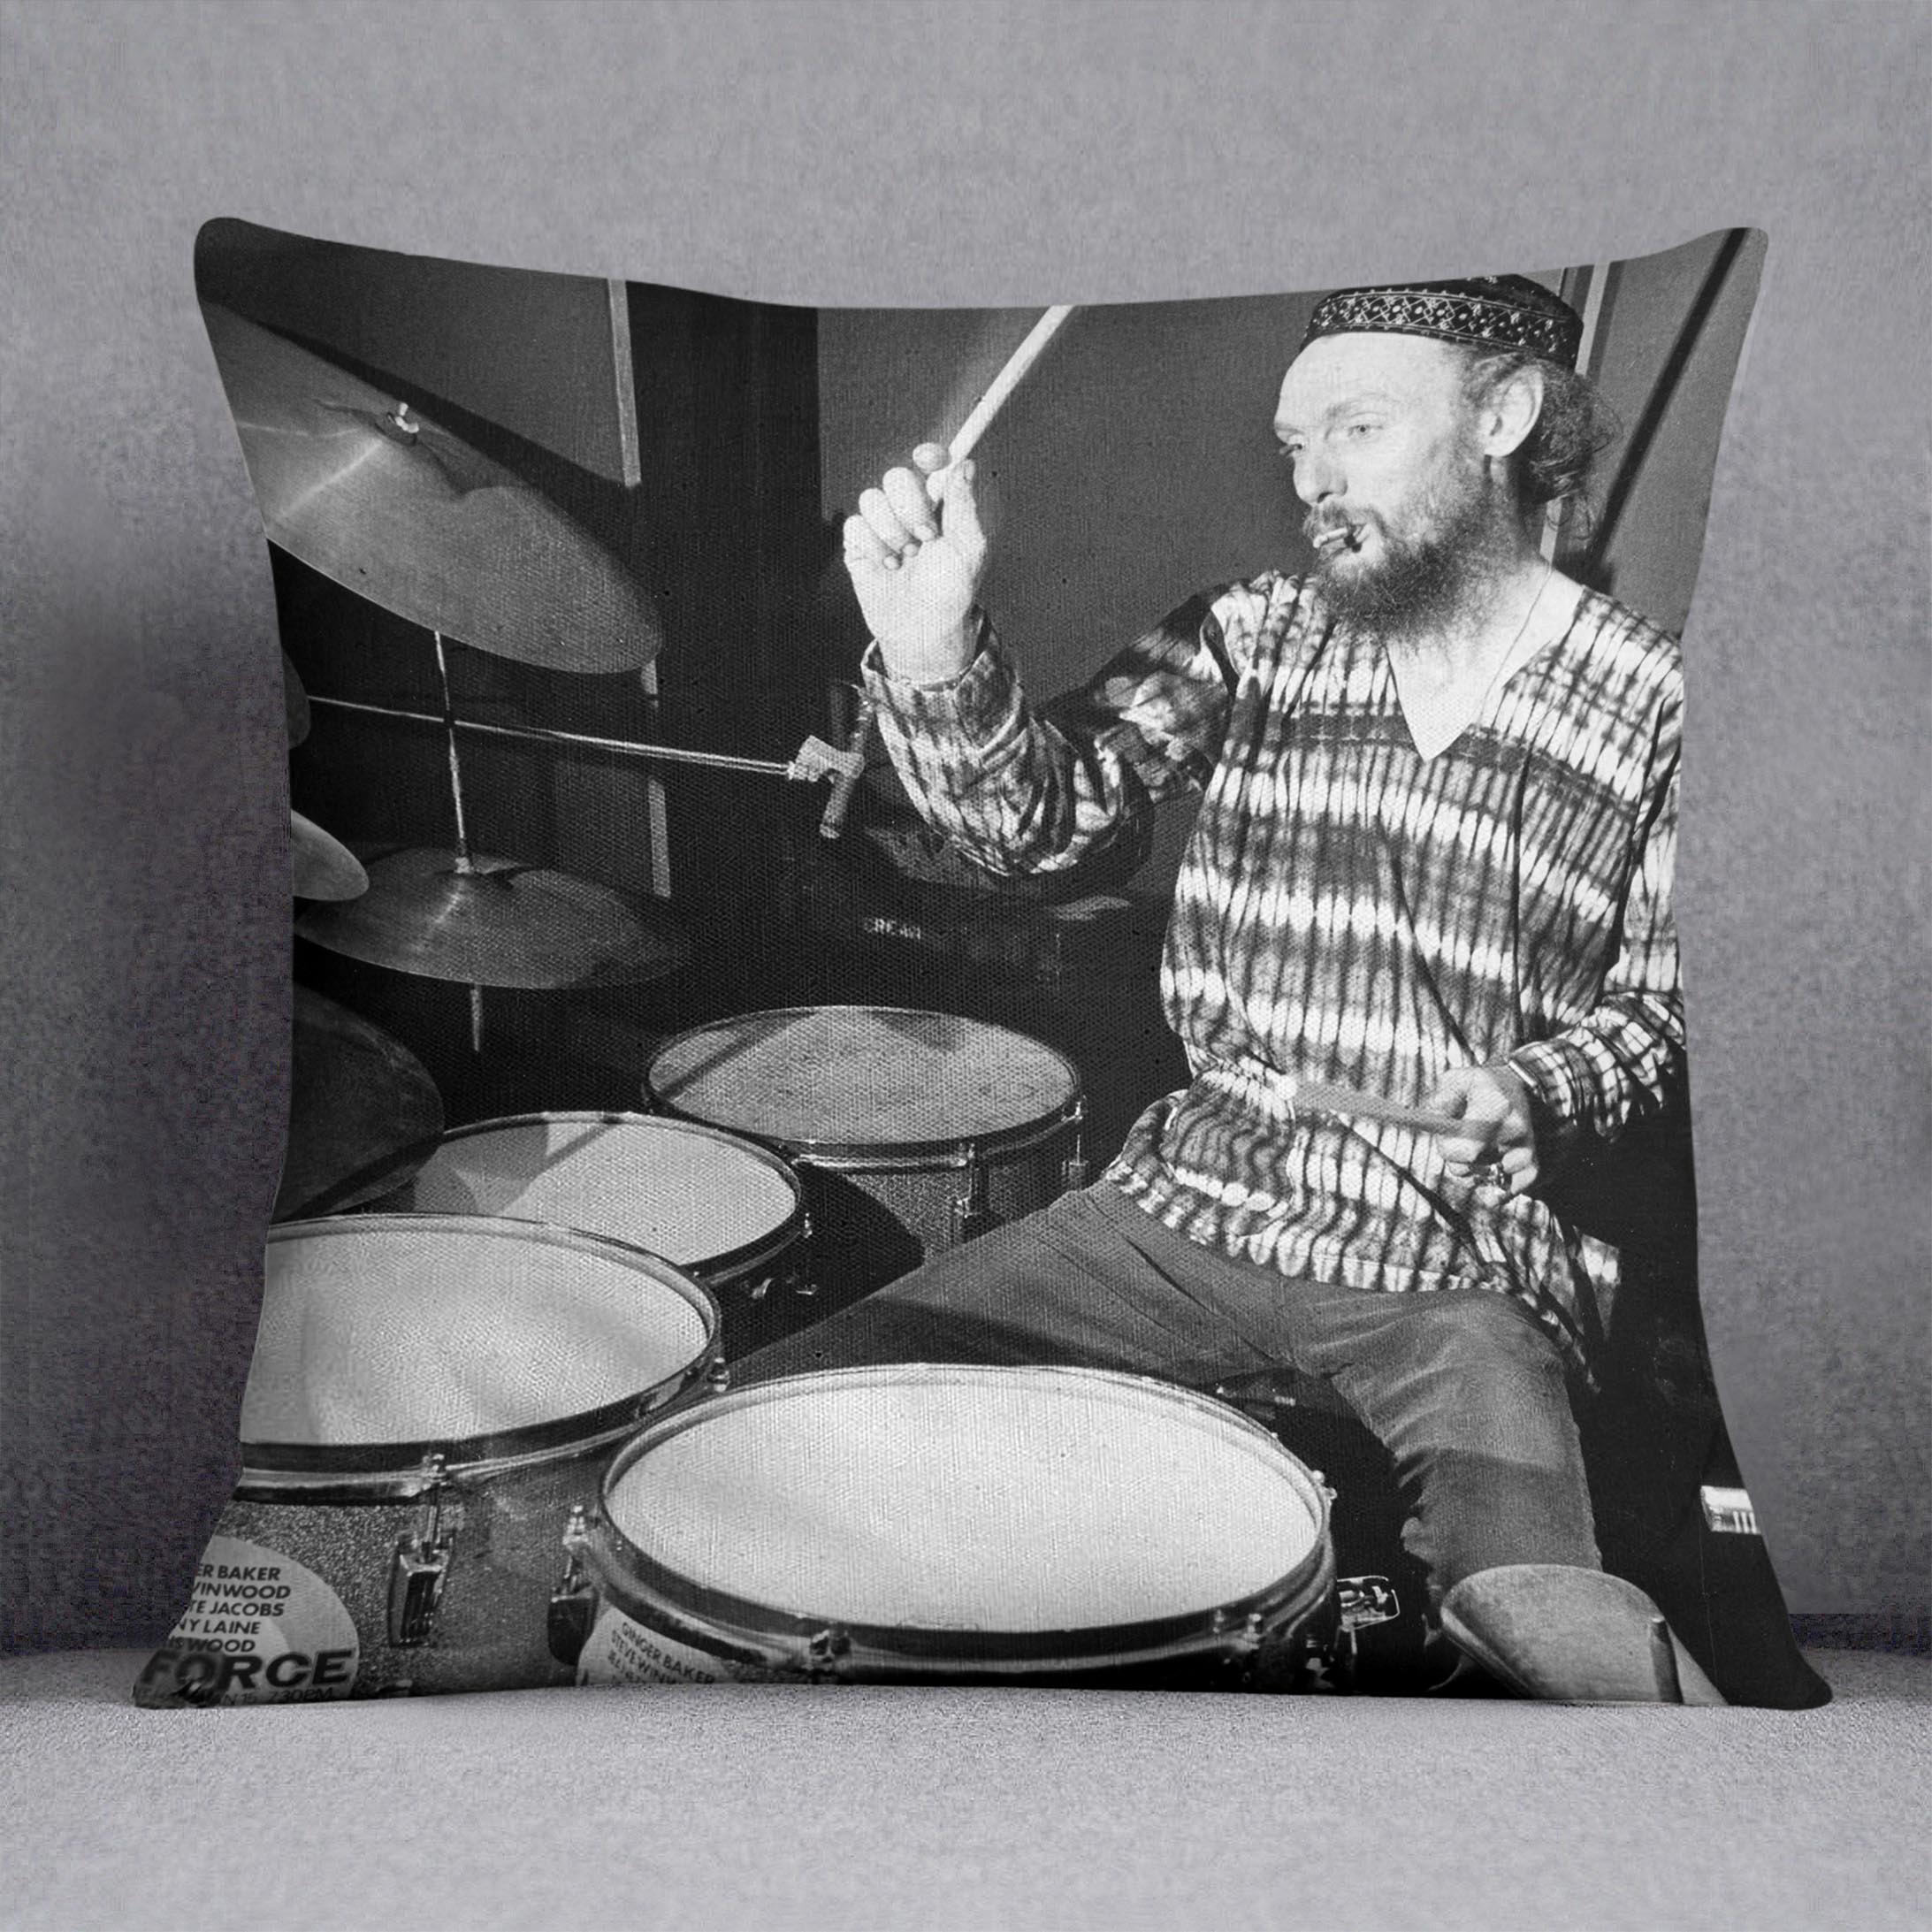 Ginger Baker on the drums Cushion - Canvas Art Rocks - 1